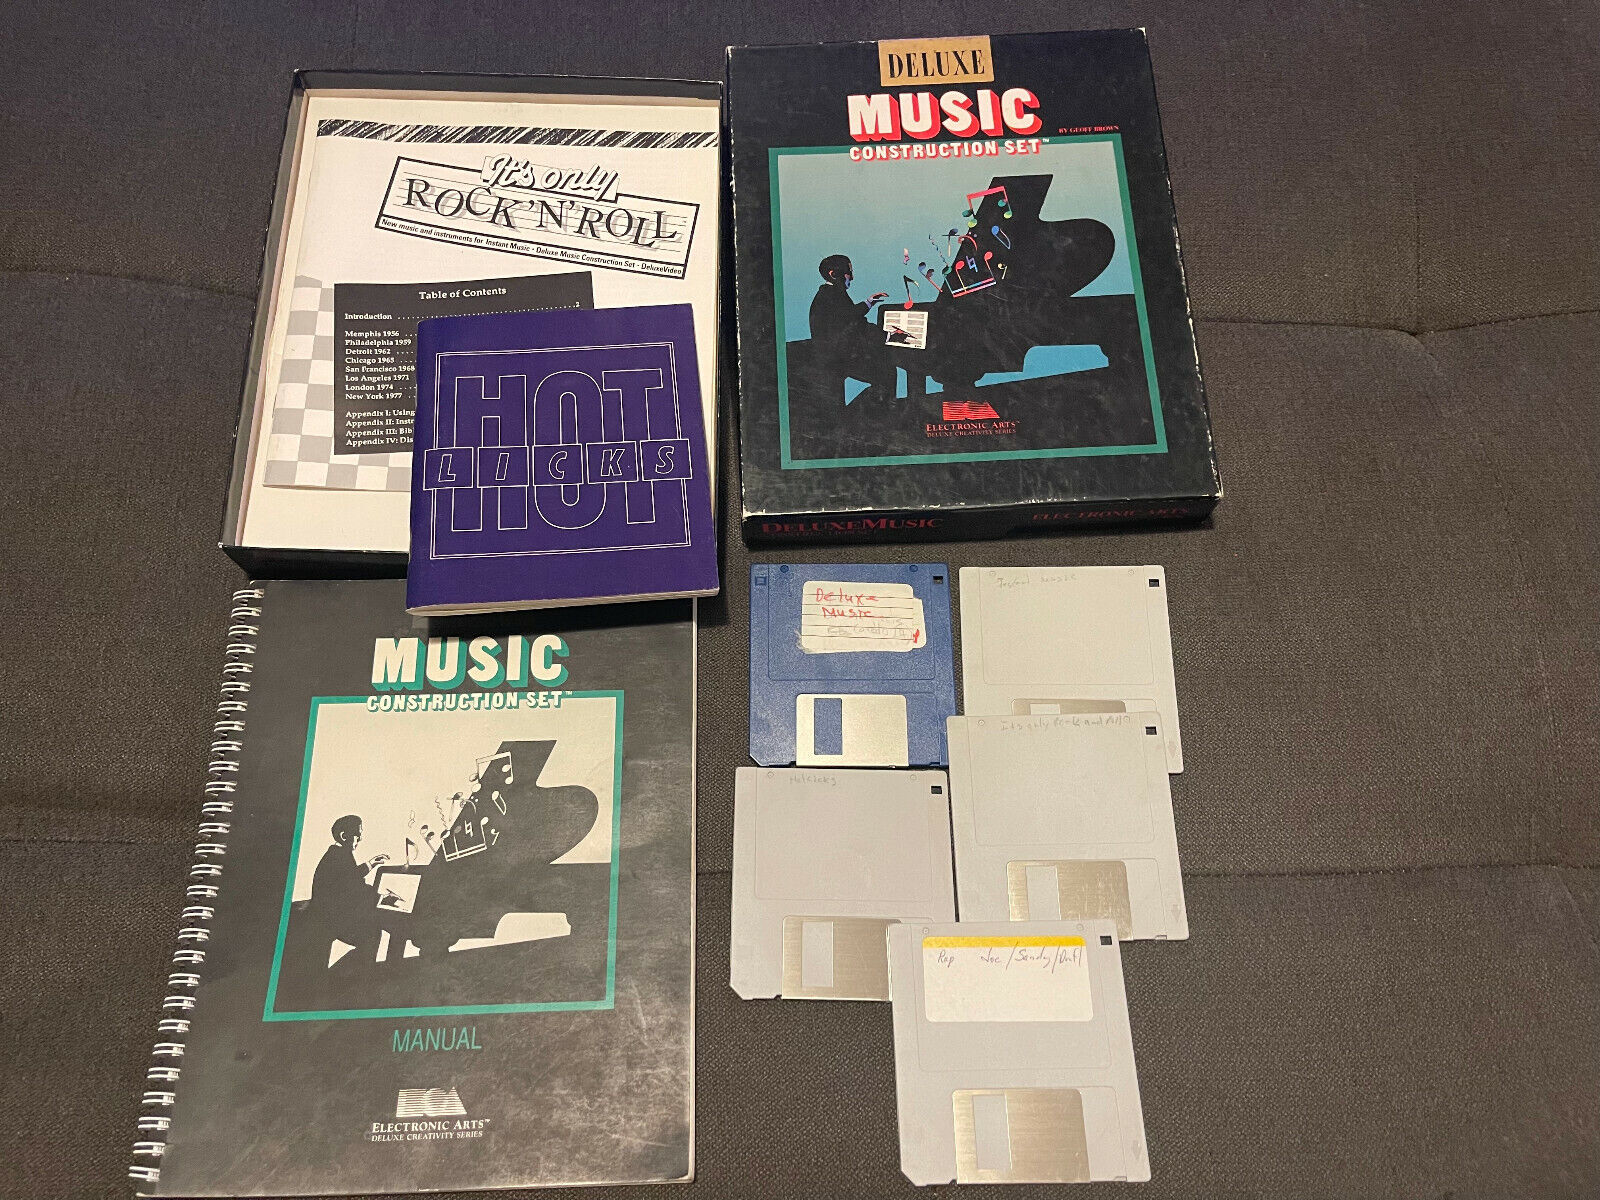 Electronic Arts Deluxe Music Construction Set for Amiga